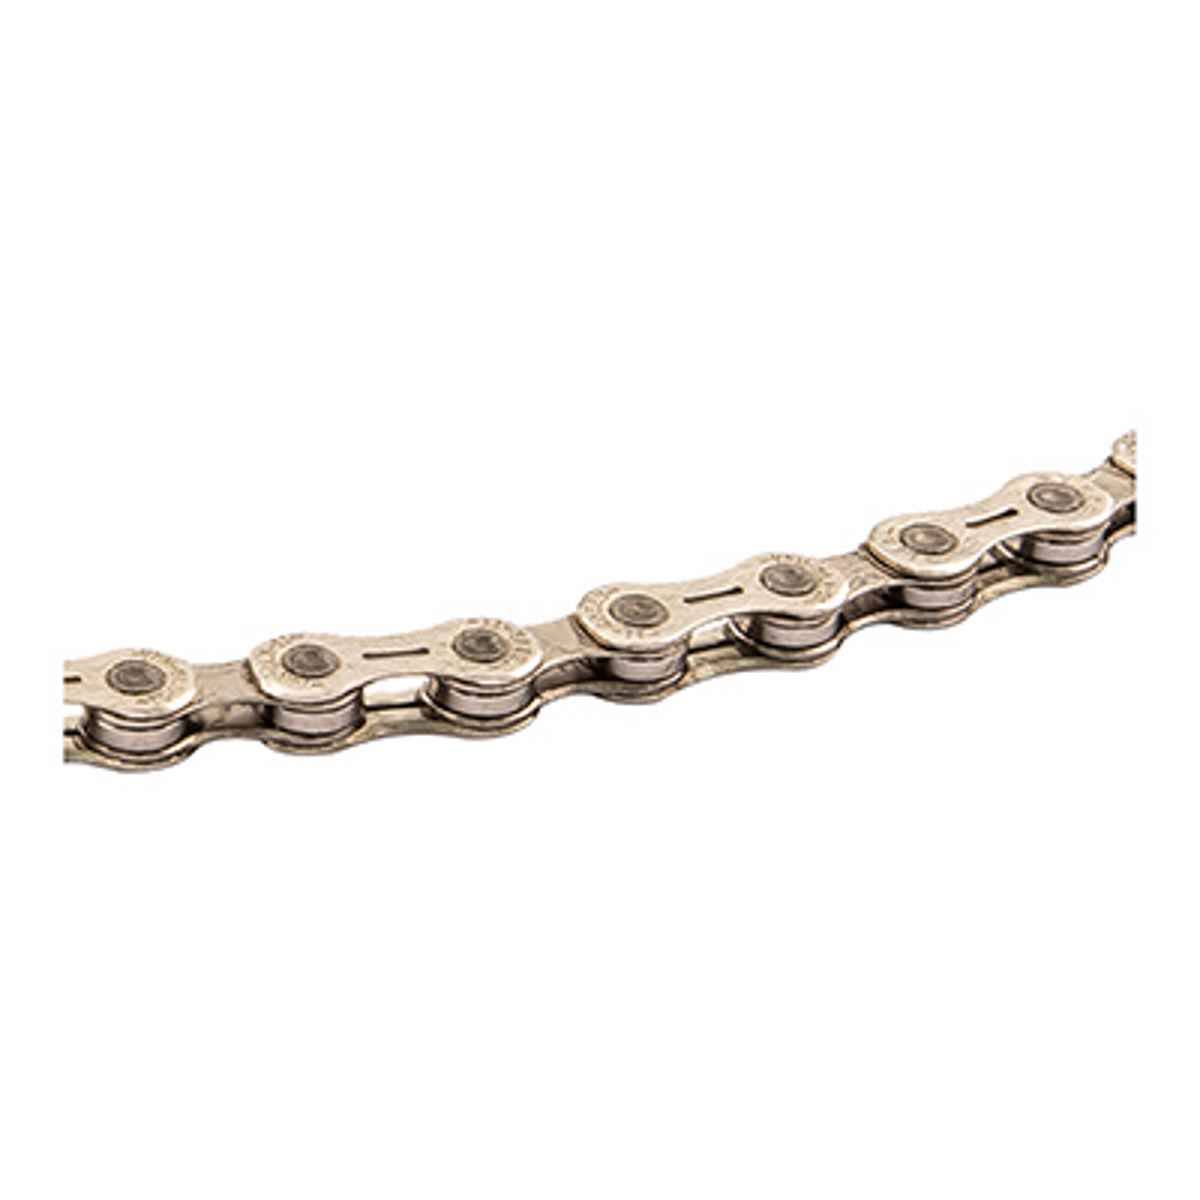 Clarks High Performance Chain Silver 116 Links / 11S